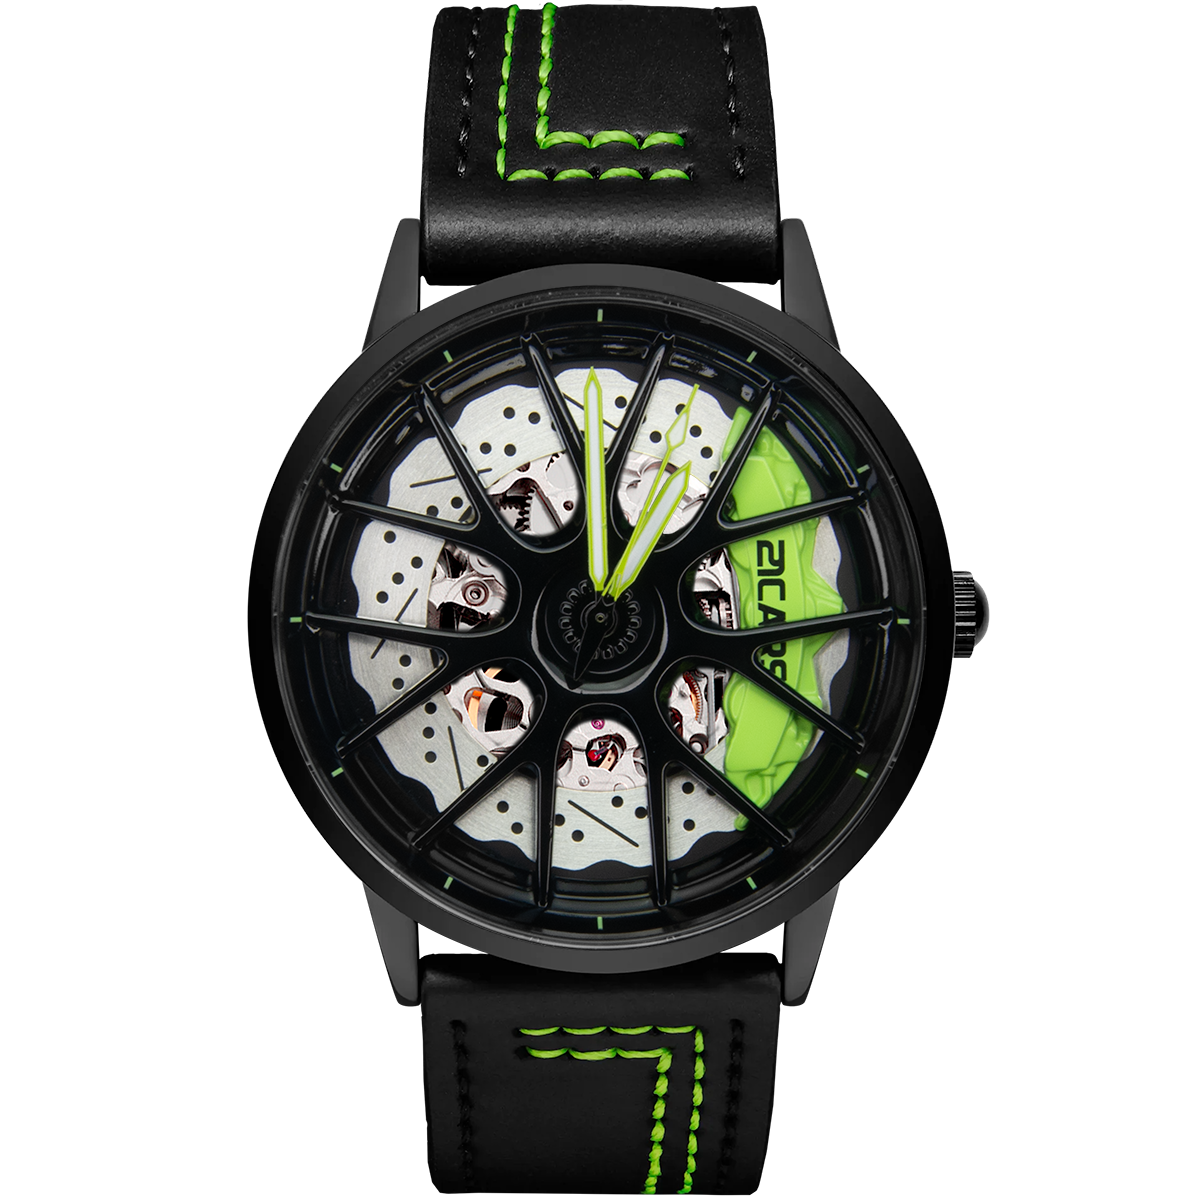 Trackmaster GT3 - Green | Automatic